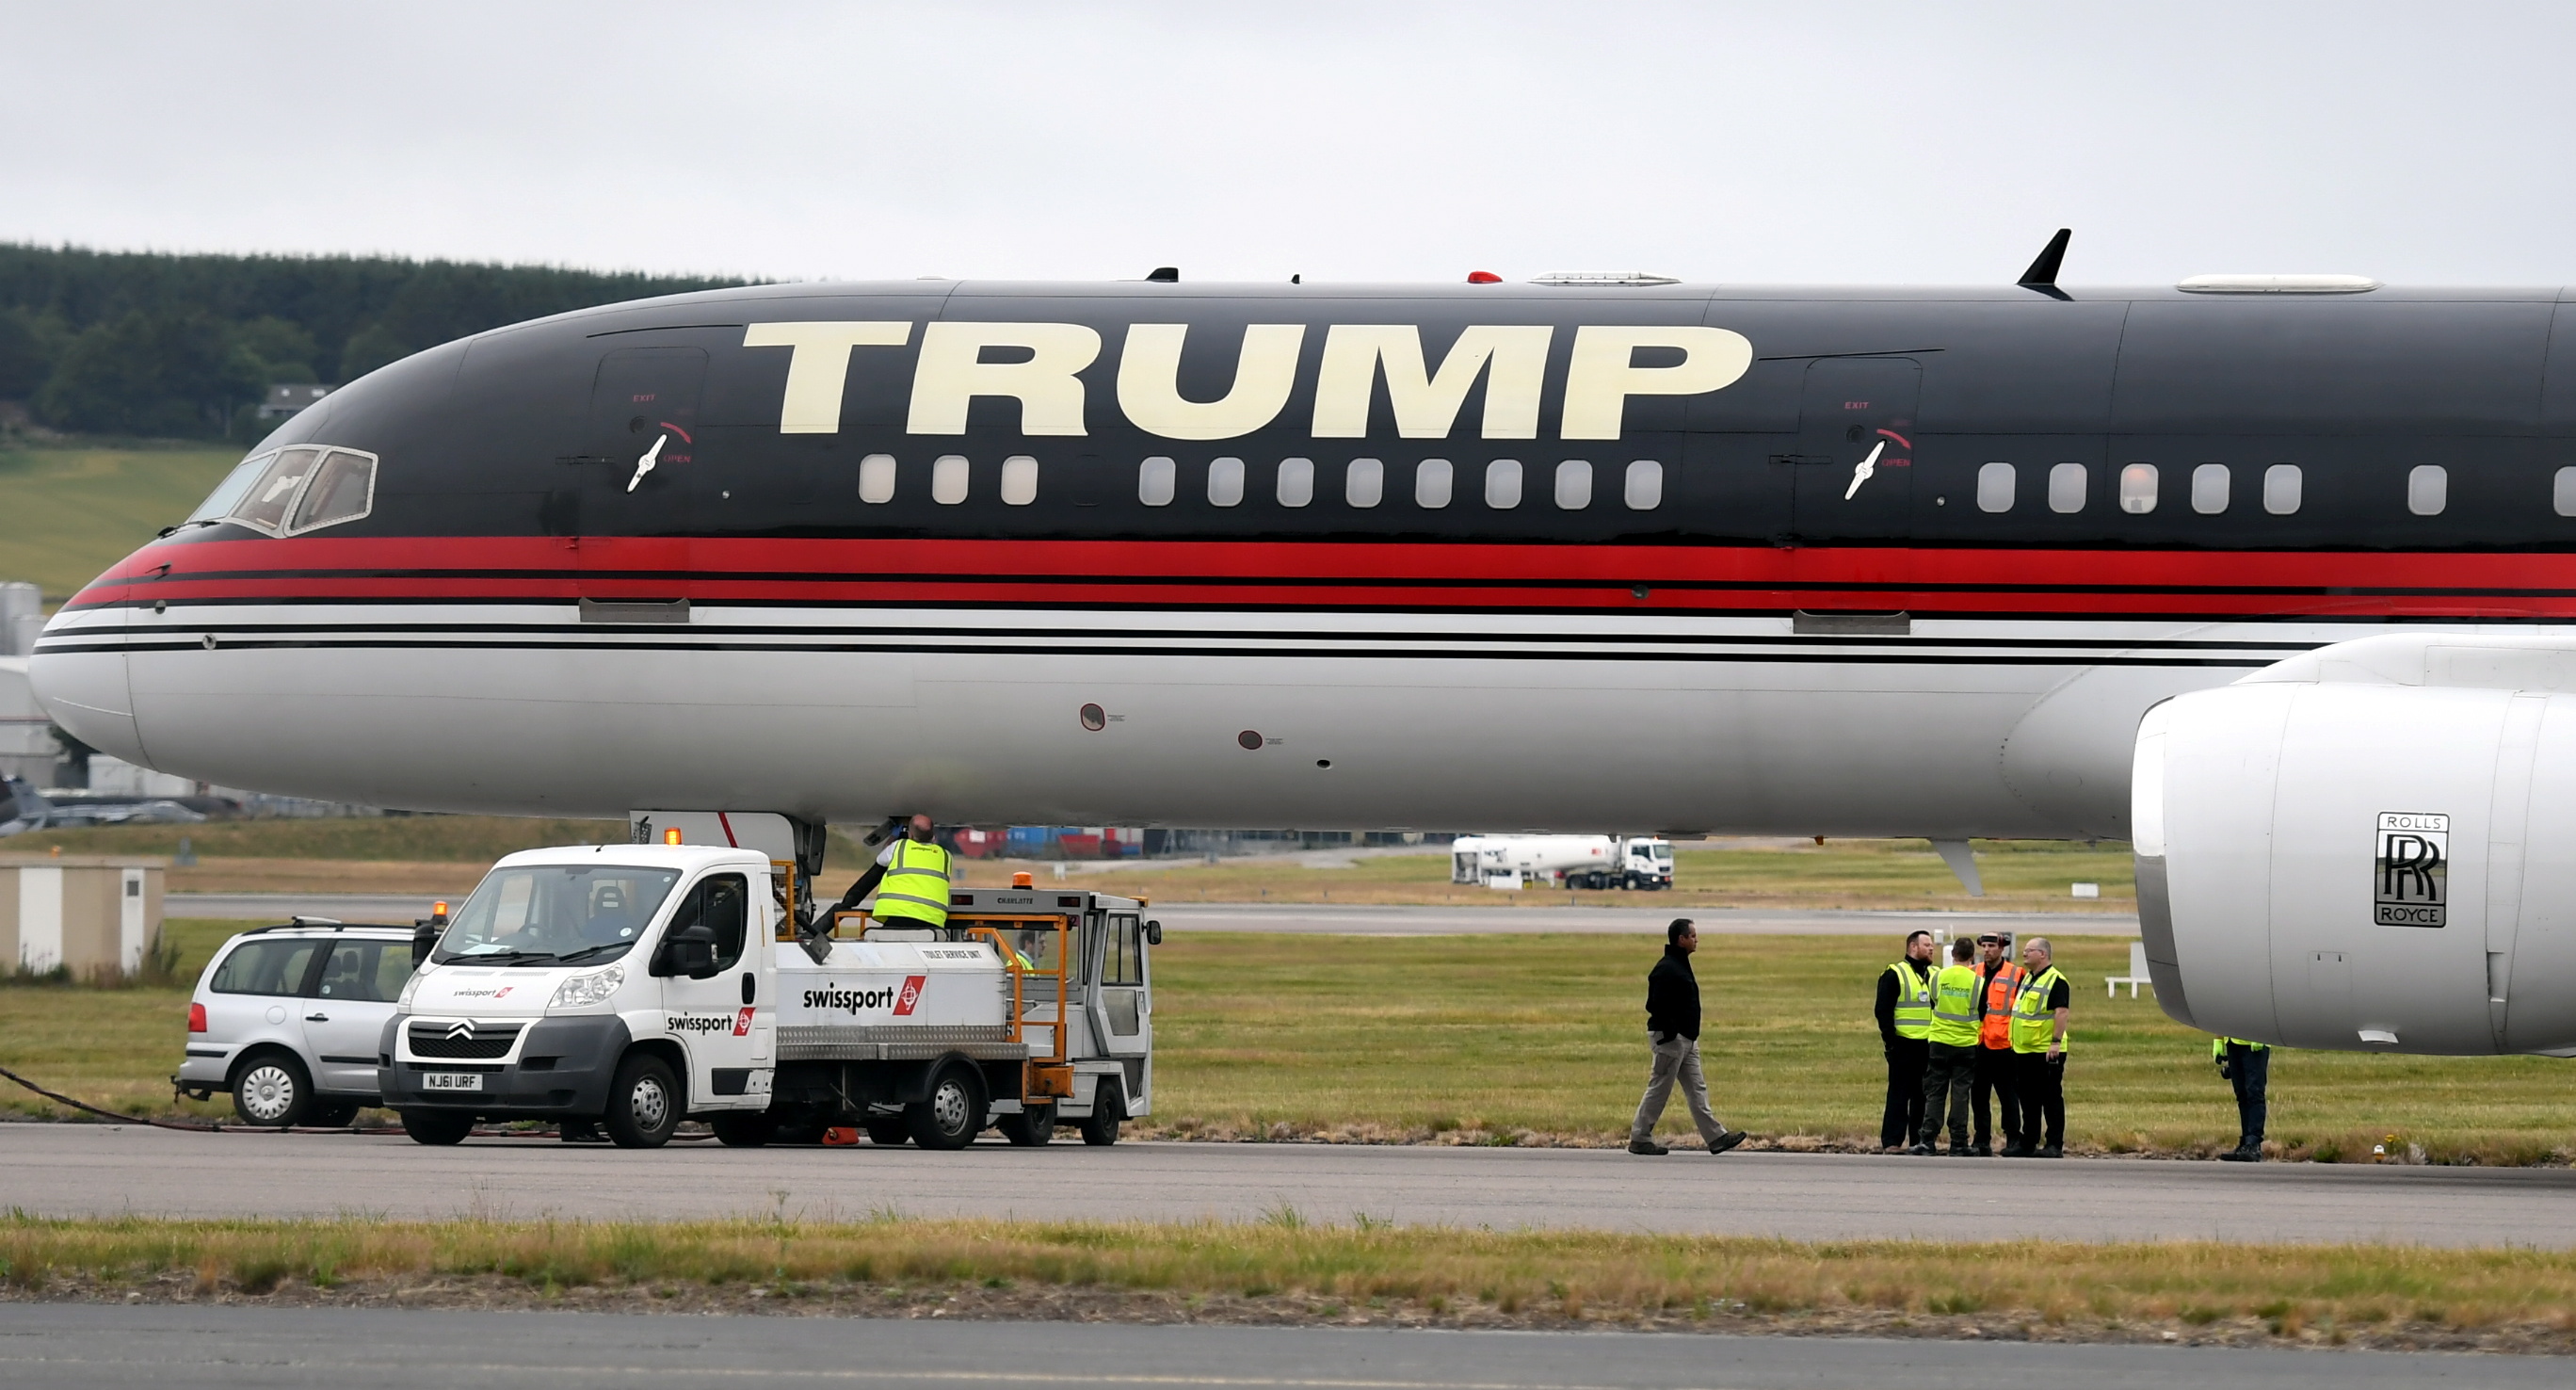 Donald Trump's private jet at Aberdeen Airport.
Picture by Chris Sumner.